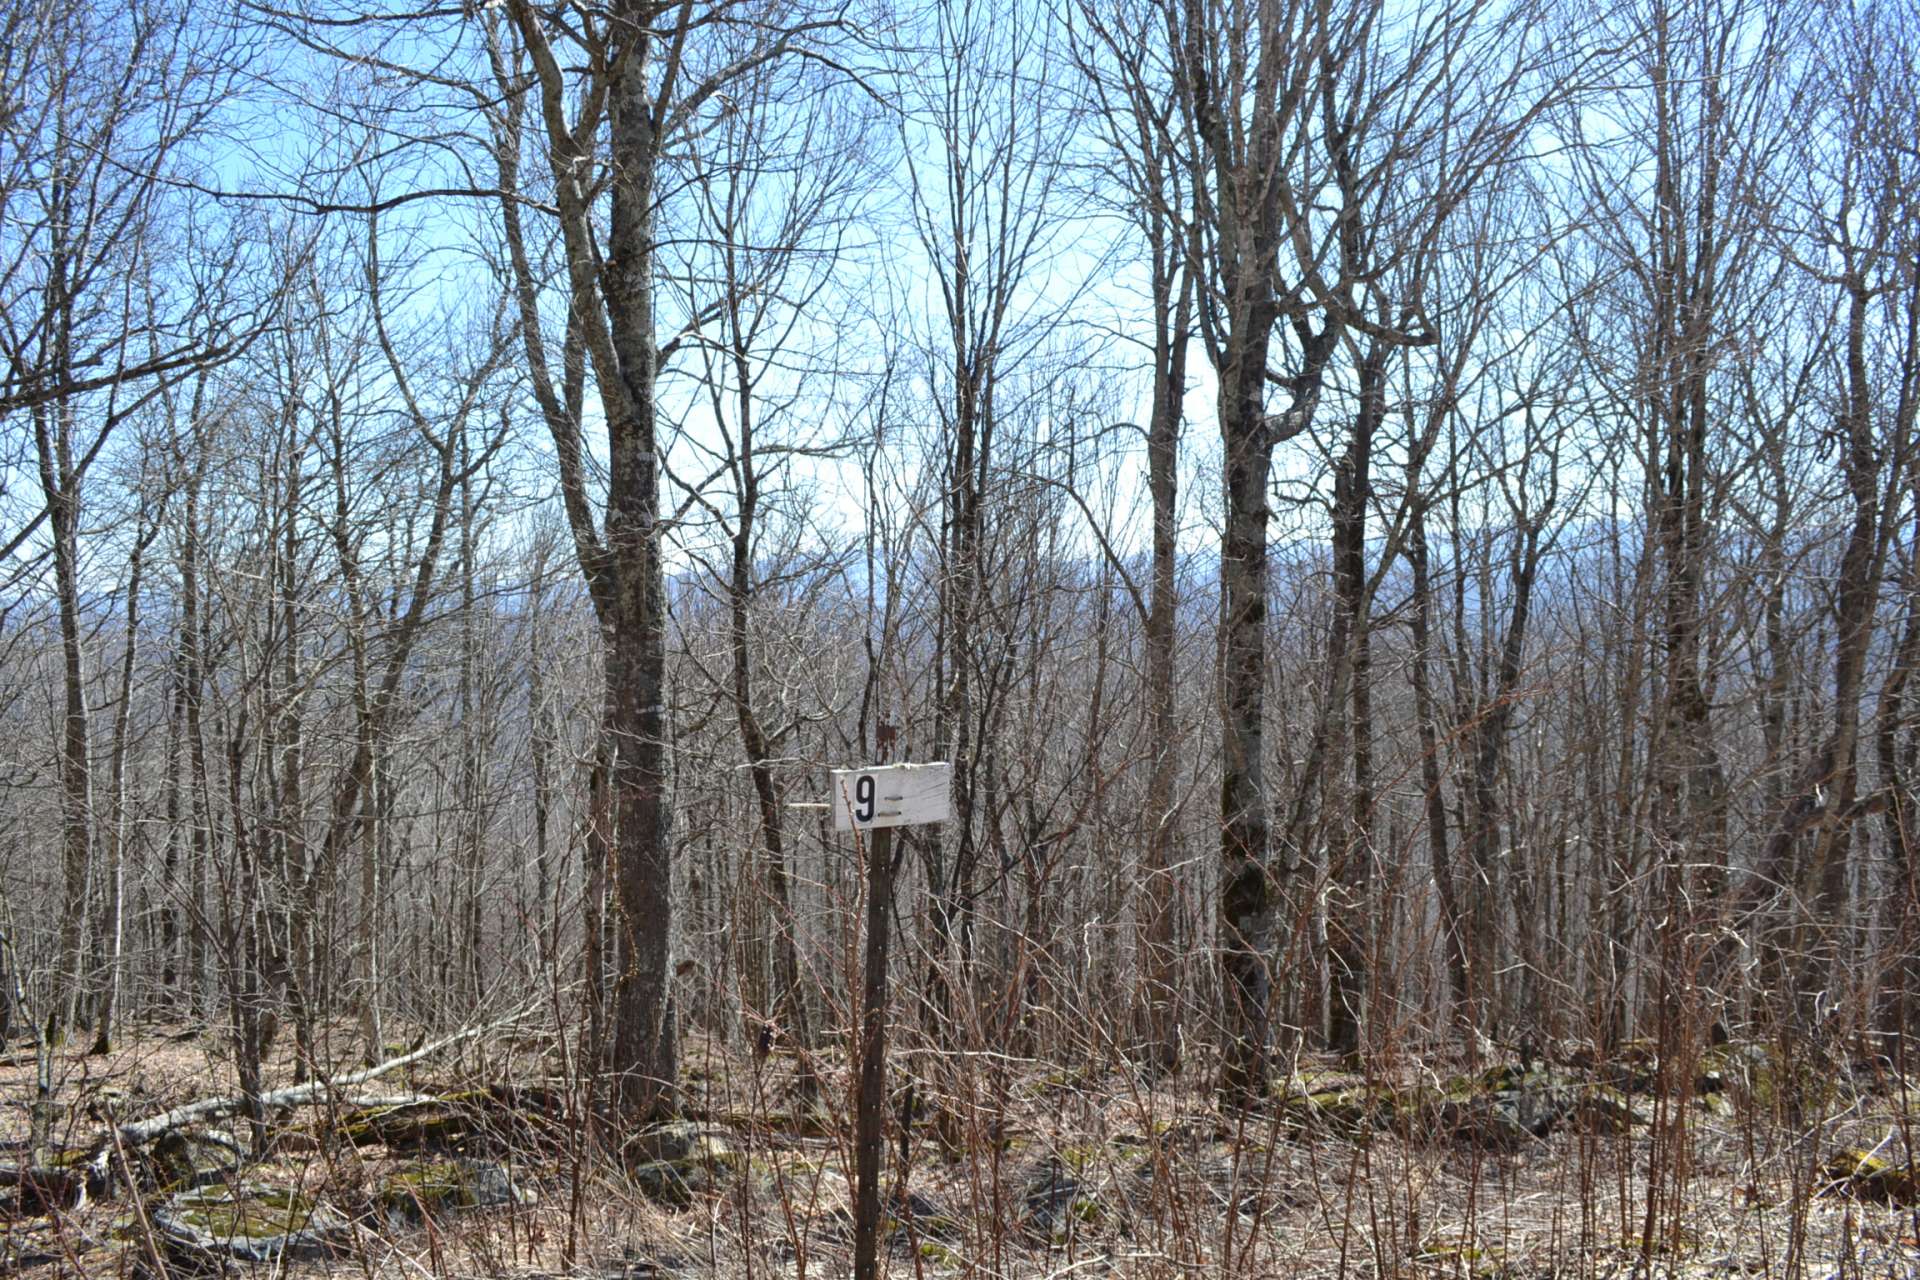 Lot 9 is a 5.29 acre wooded home site offering potential year round views and priced at $35,000. *Under Contract